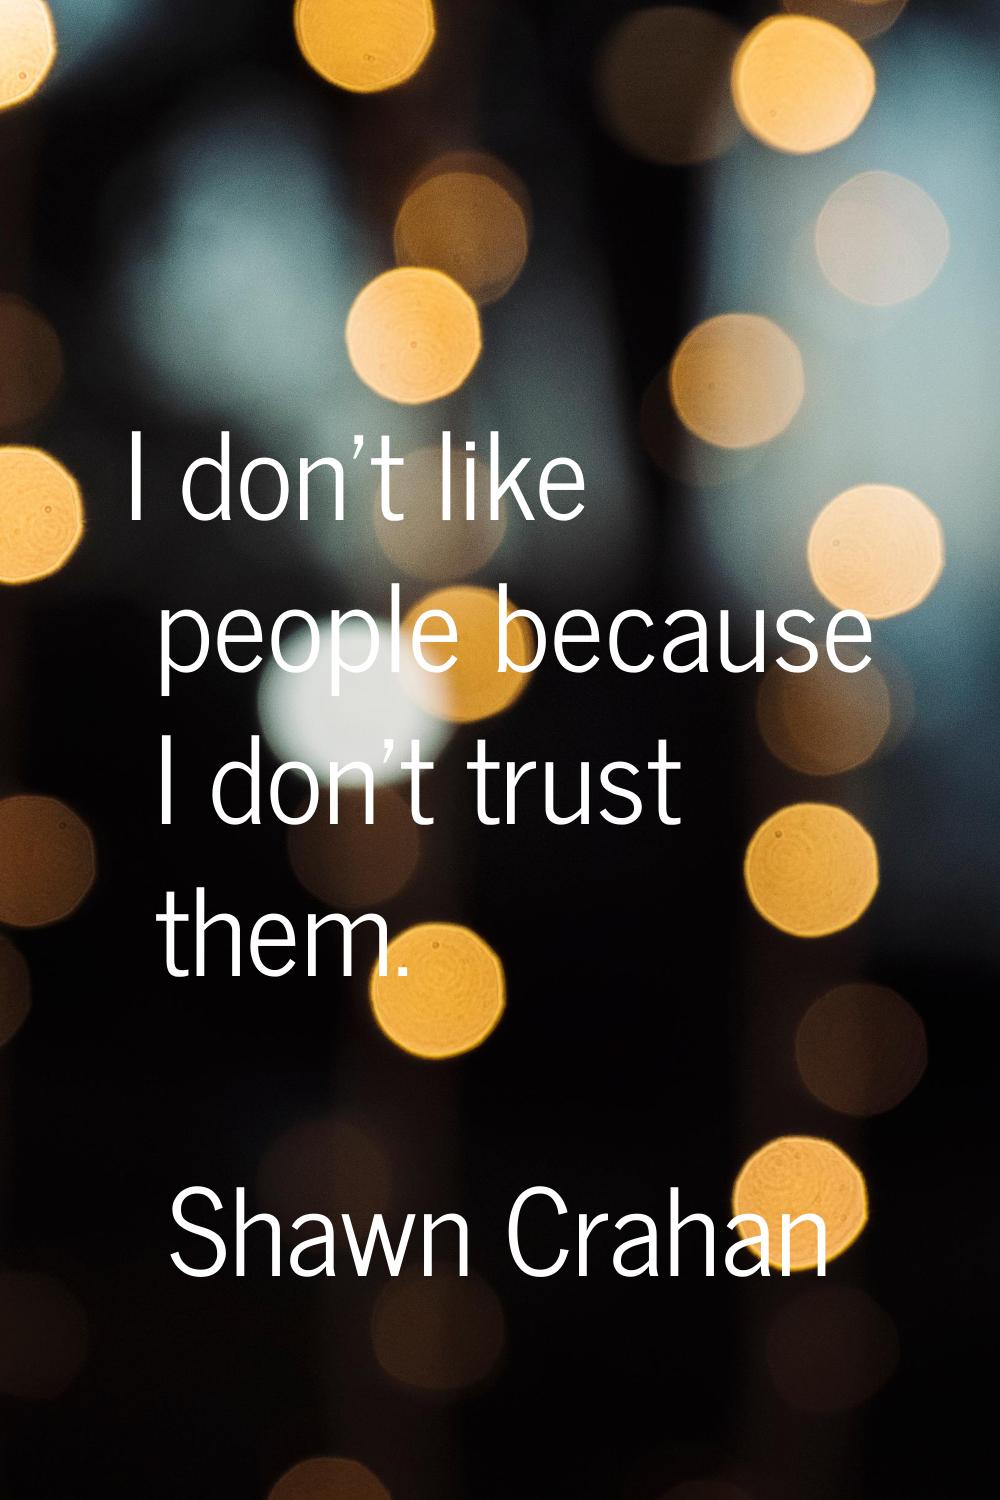 I don't like people because I don't trust them.